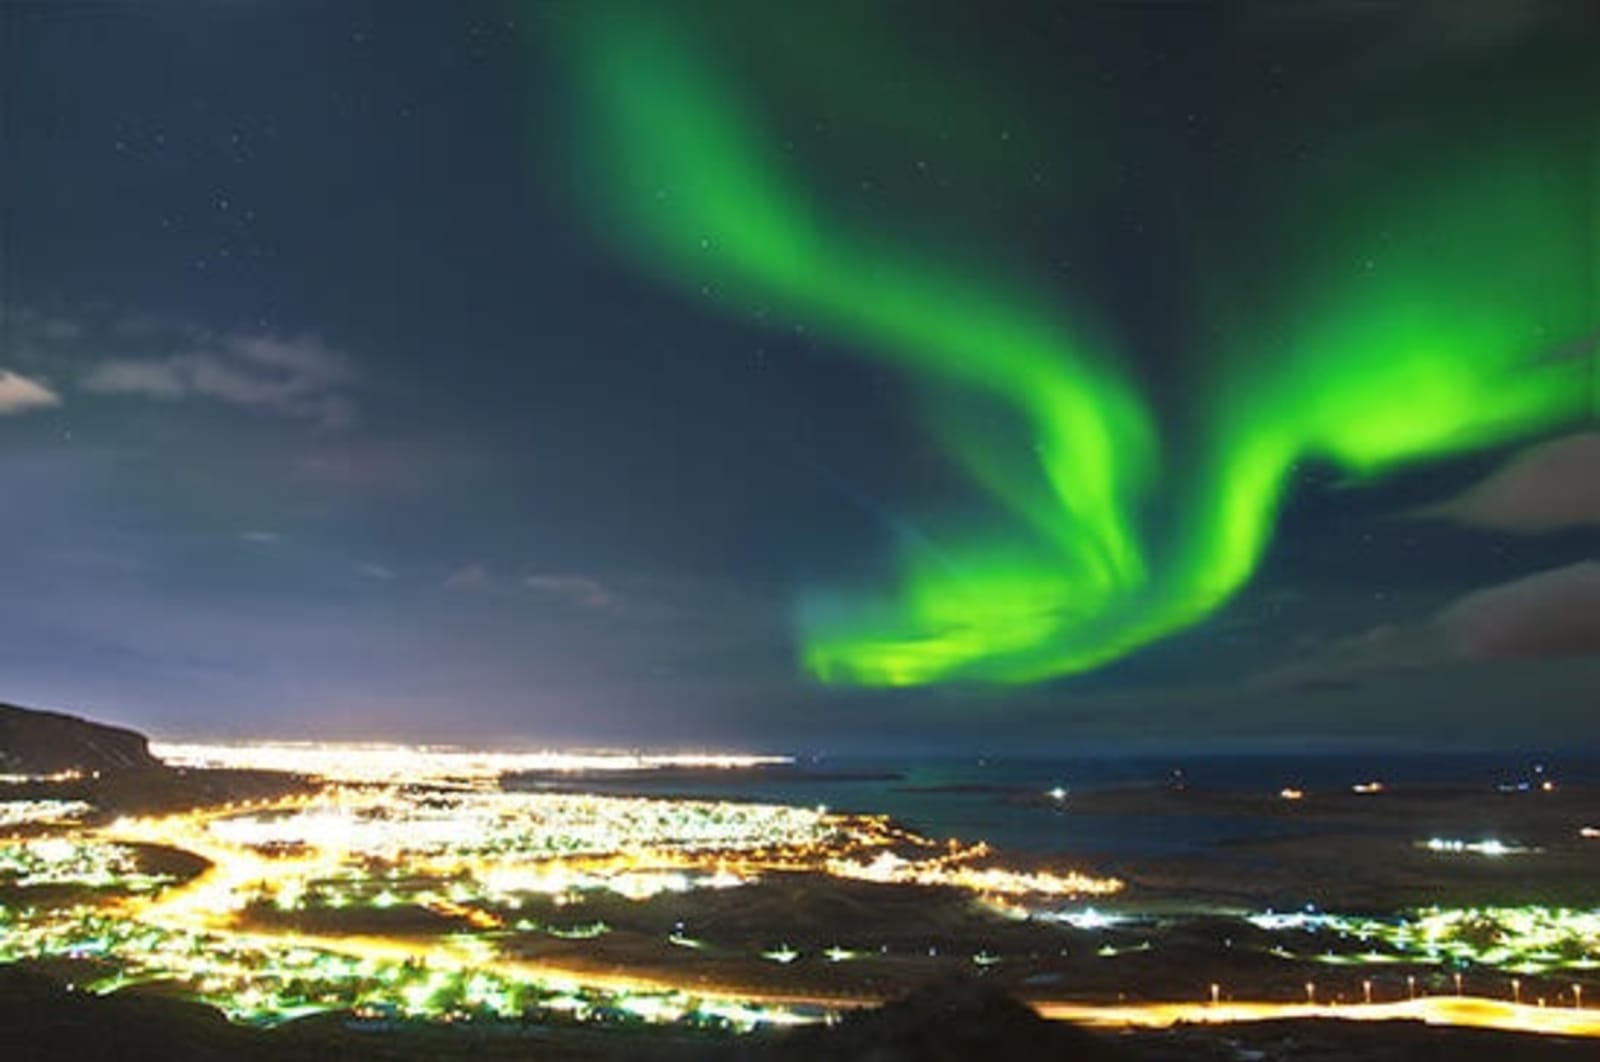 Image of Northern Lights over city at night